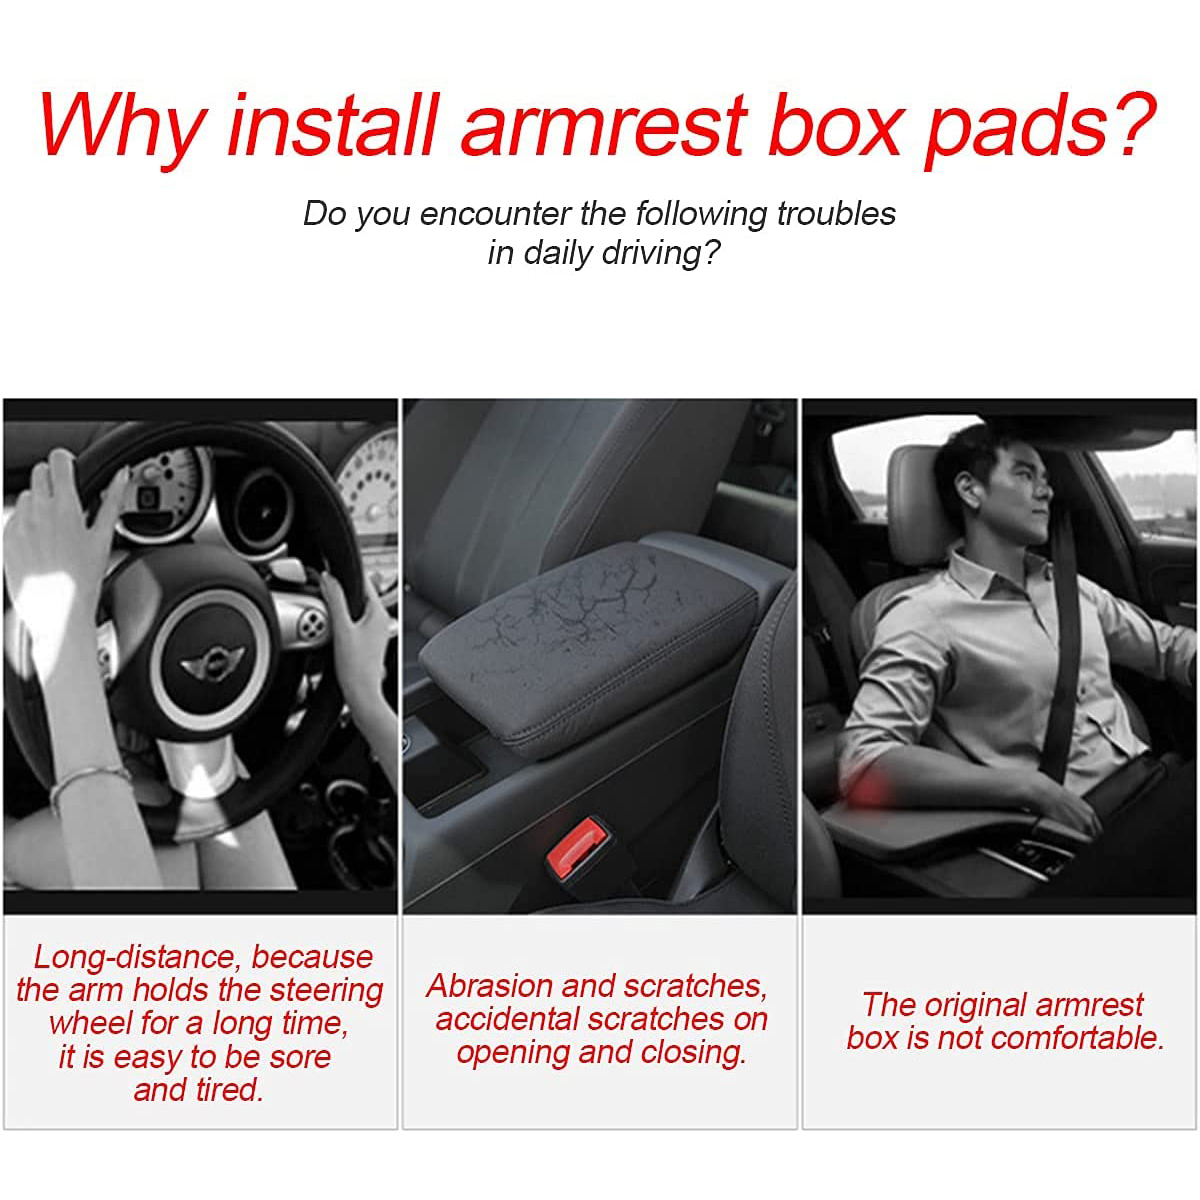 Car Armrest Cover Universal Car Armrest Pad Waterproof Car Center Console Cover 11.8 x 7.87 Inch Car Armrest Seat Box Cover Protector Car Decoration Accessories for Vehicle SUV Truck Car (Black) - image 3 of 8